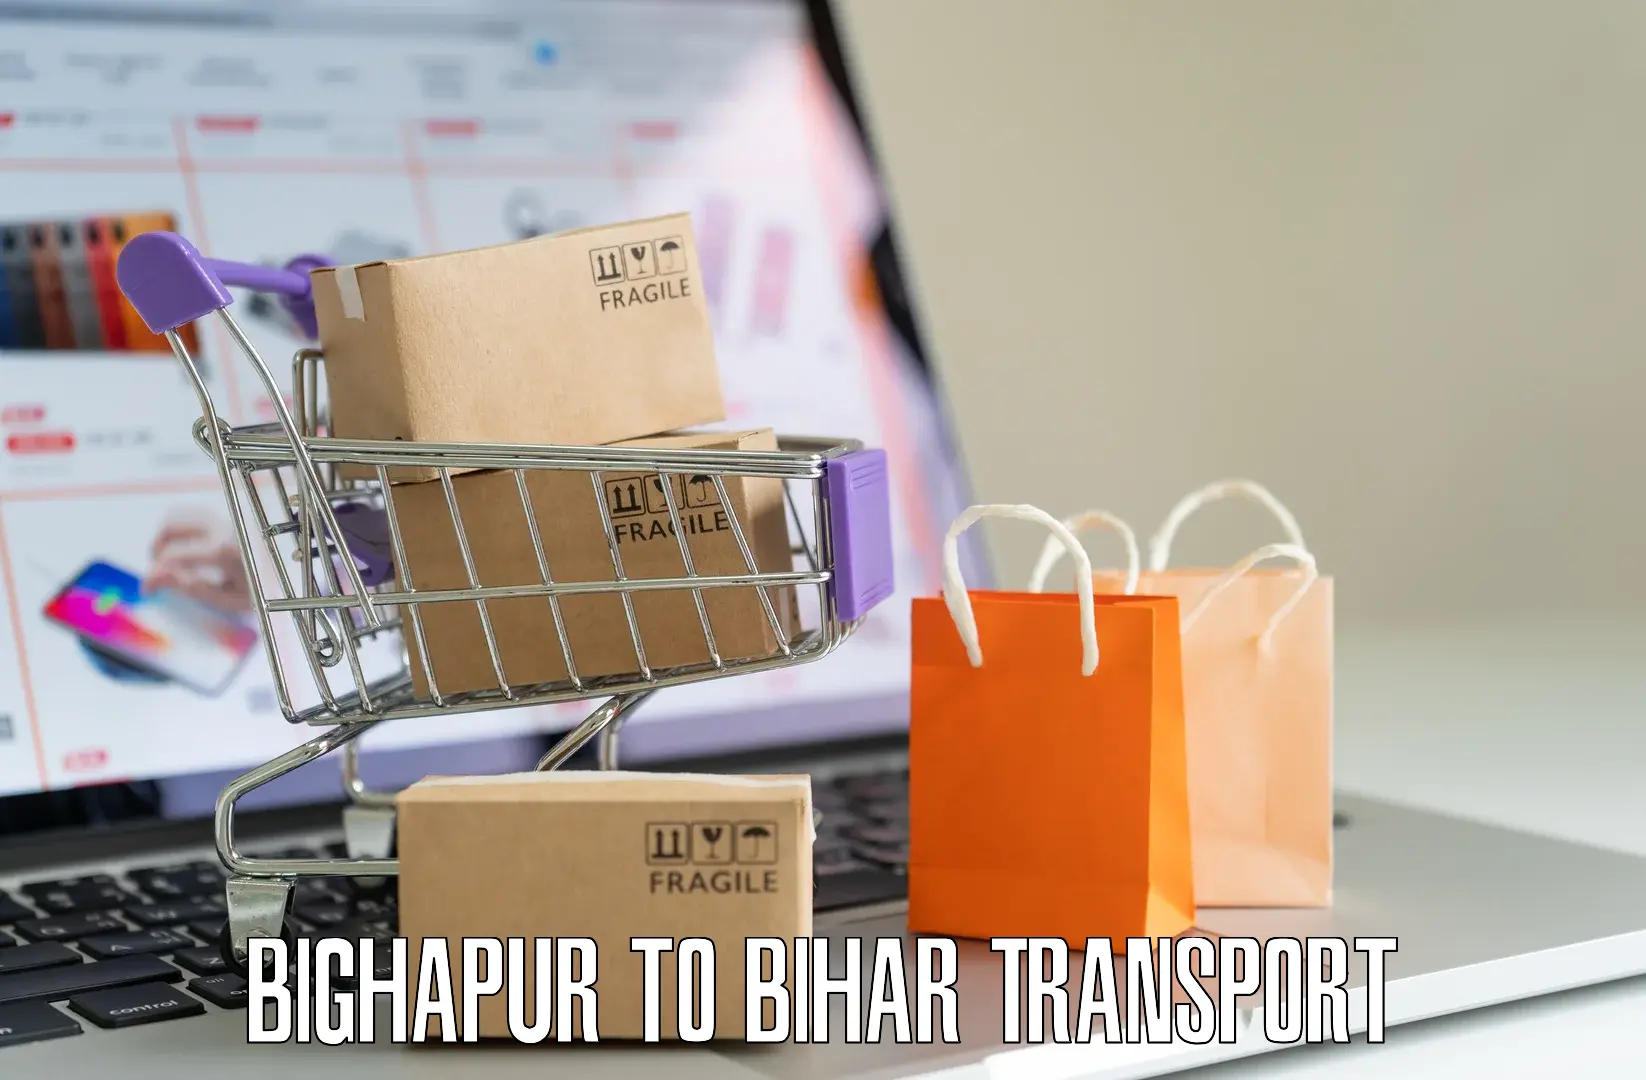 Commercial transport service Bighapur to Biraul